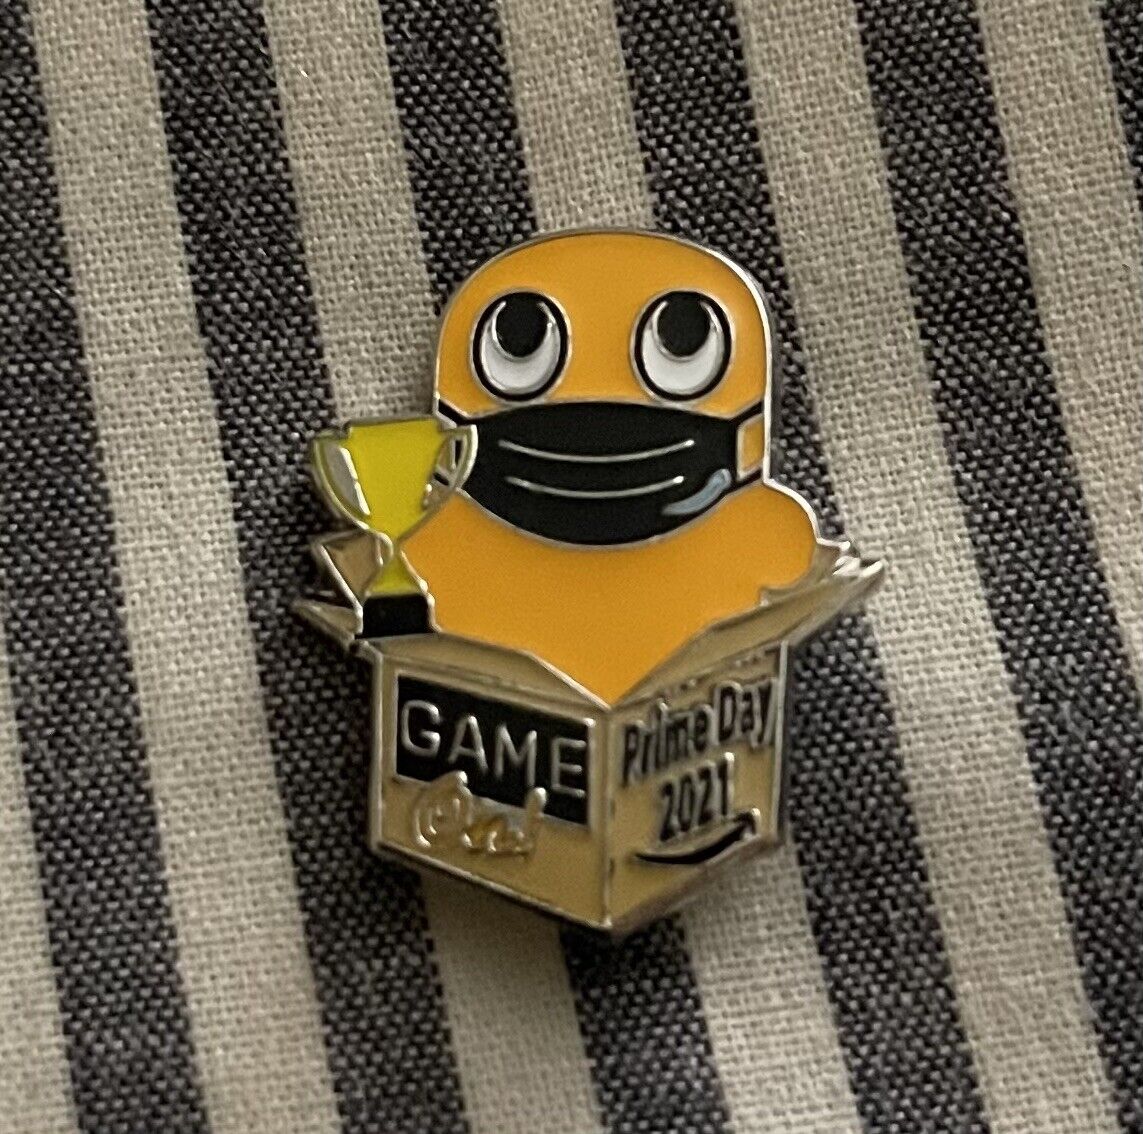 Amazon Employee Peccy Game On Prime Day Pins (NEW) (  )